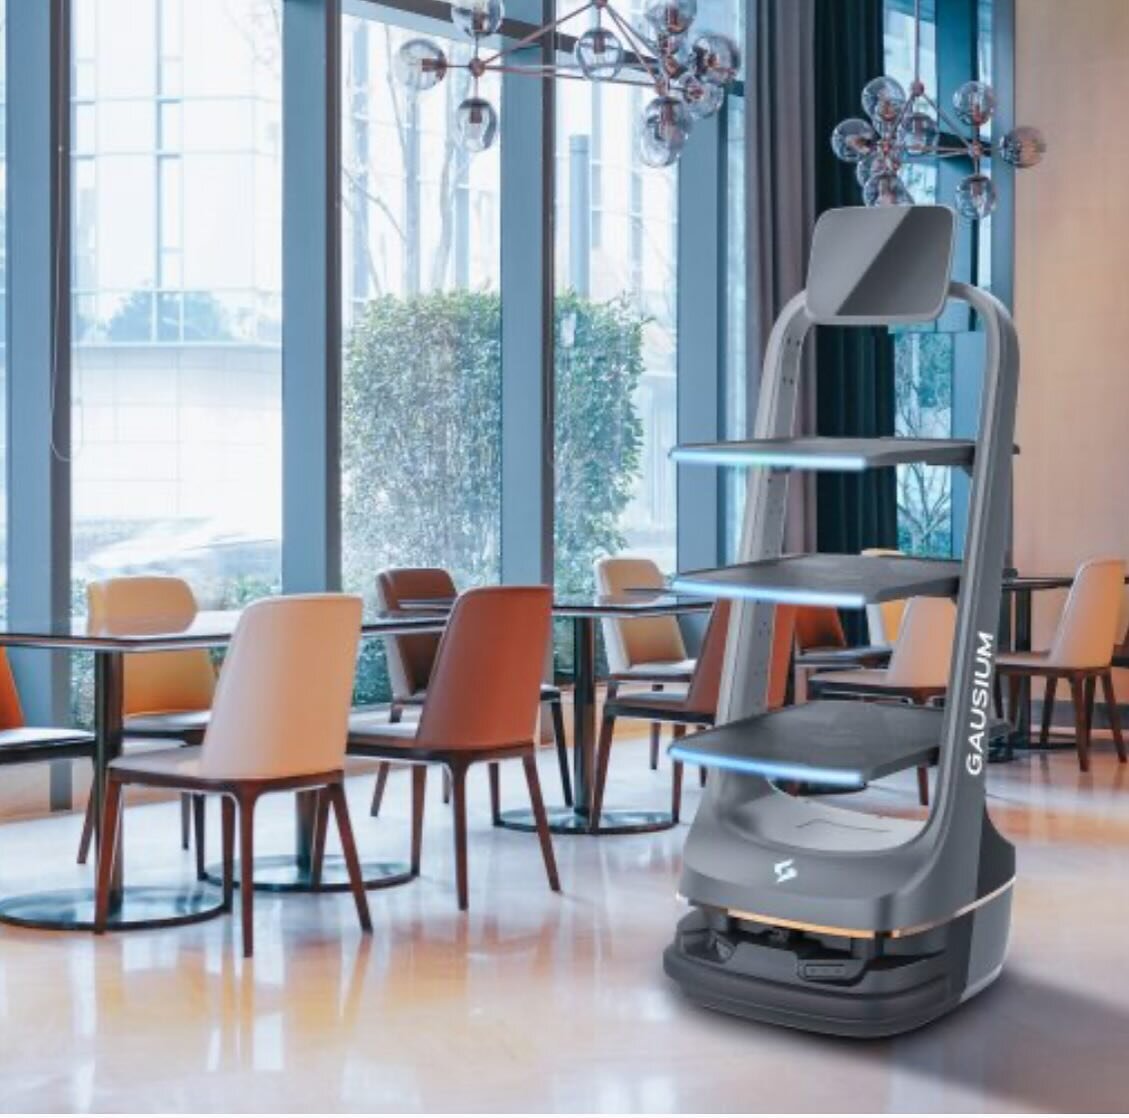 Meet our Delivery X1 Pro, an advanced autonomous indoor delivery robot, featuring a large 10-inch display, smart load-sensing serving trays and customer attraction capabilities.

#service #foodservice #drinkservice #robot #foodelivery #deliveryrobot 